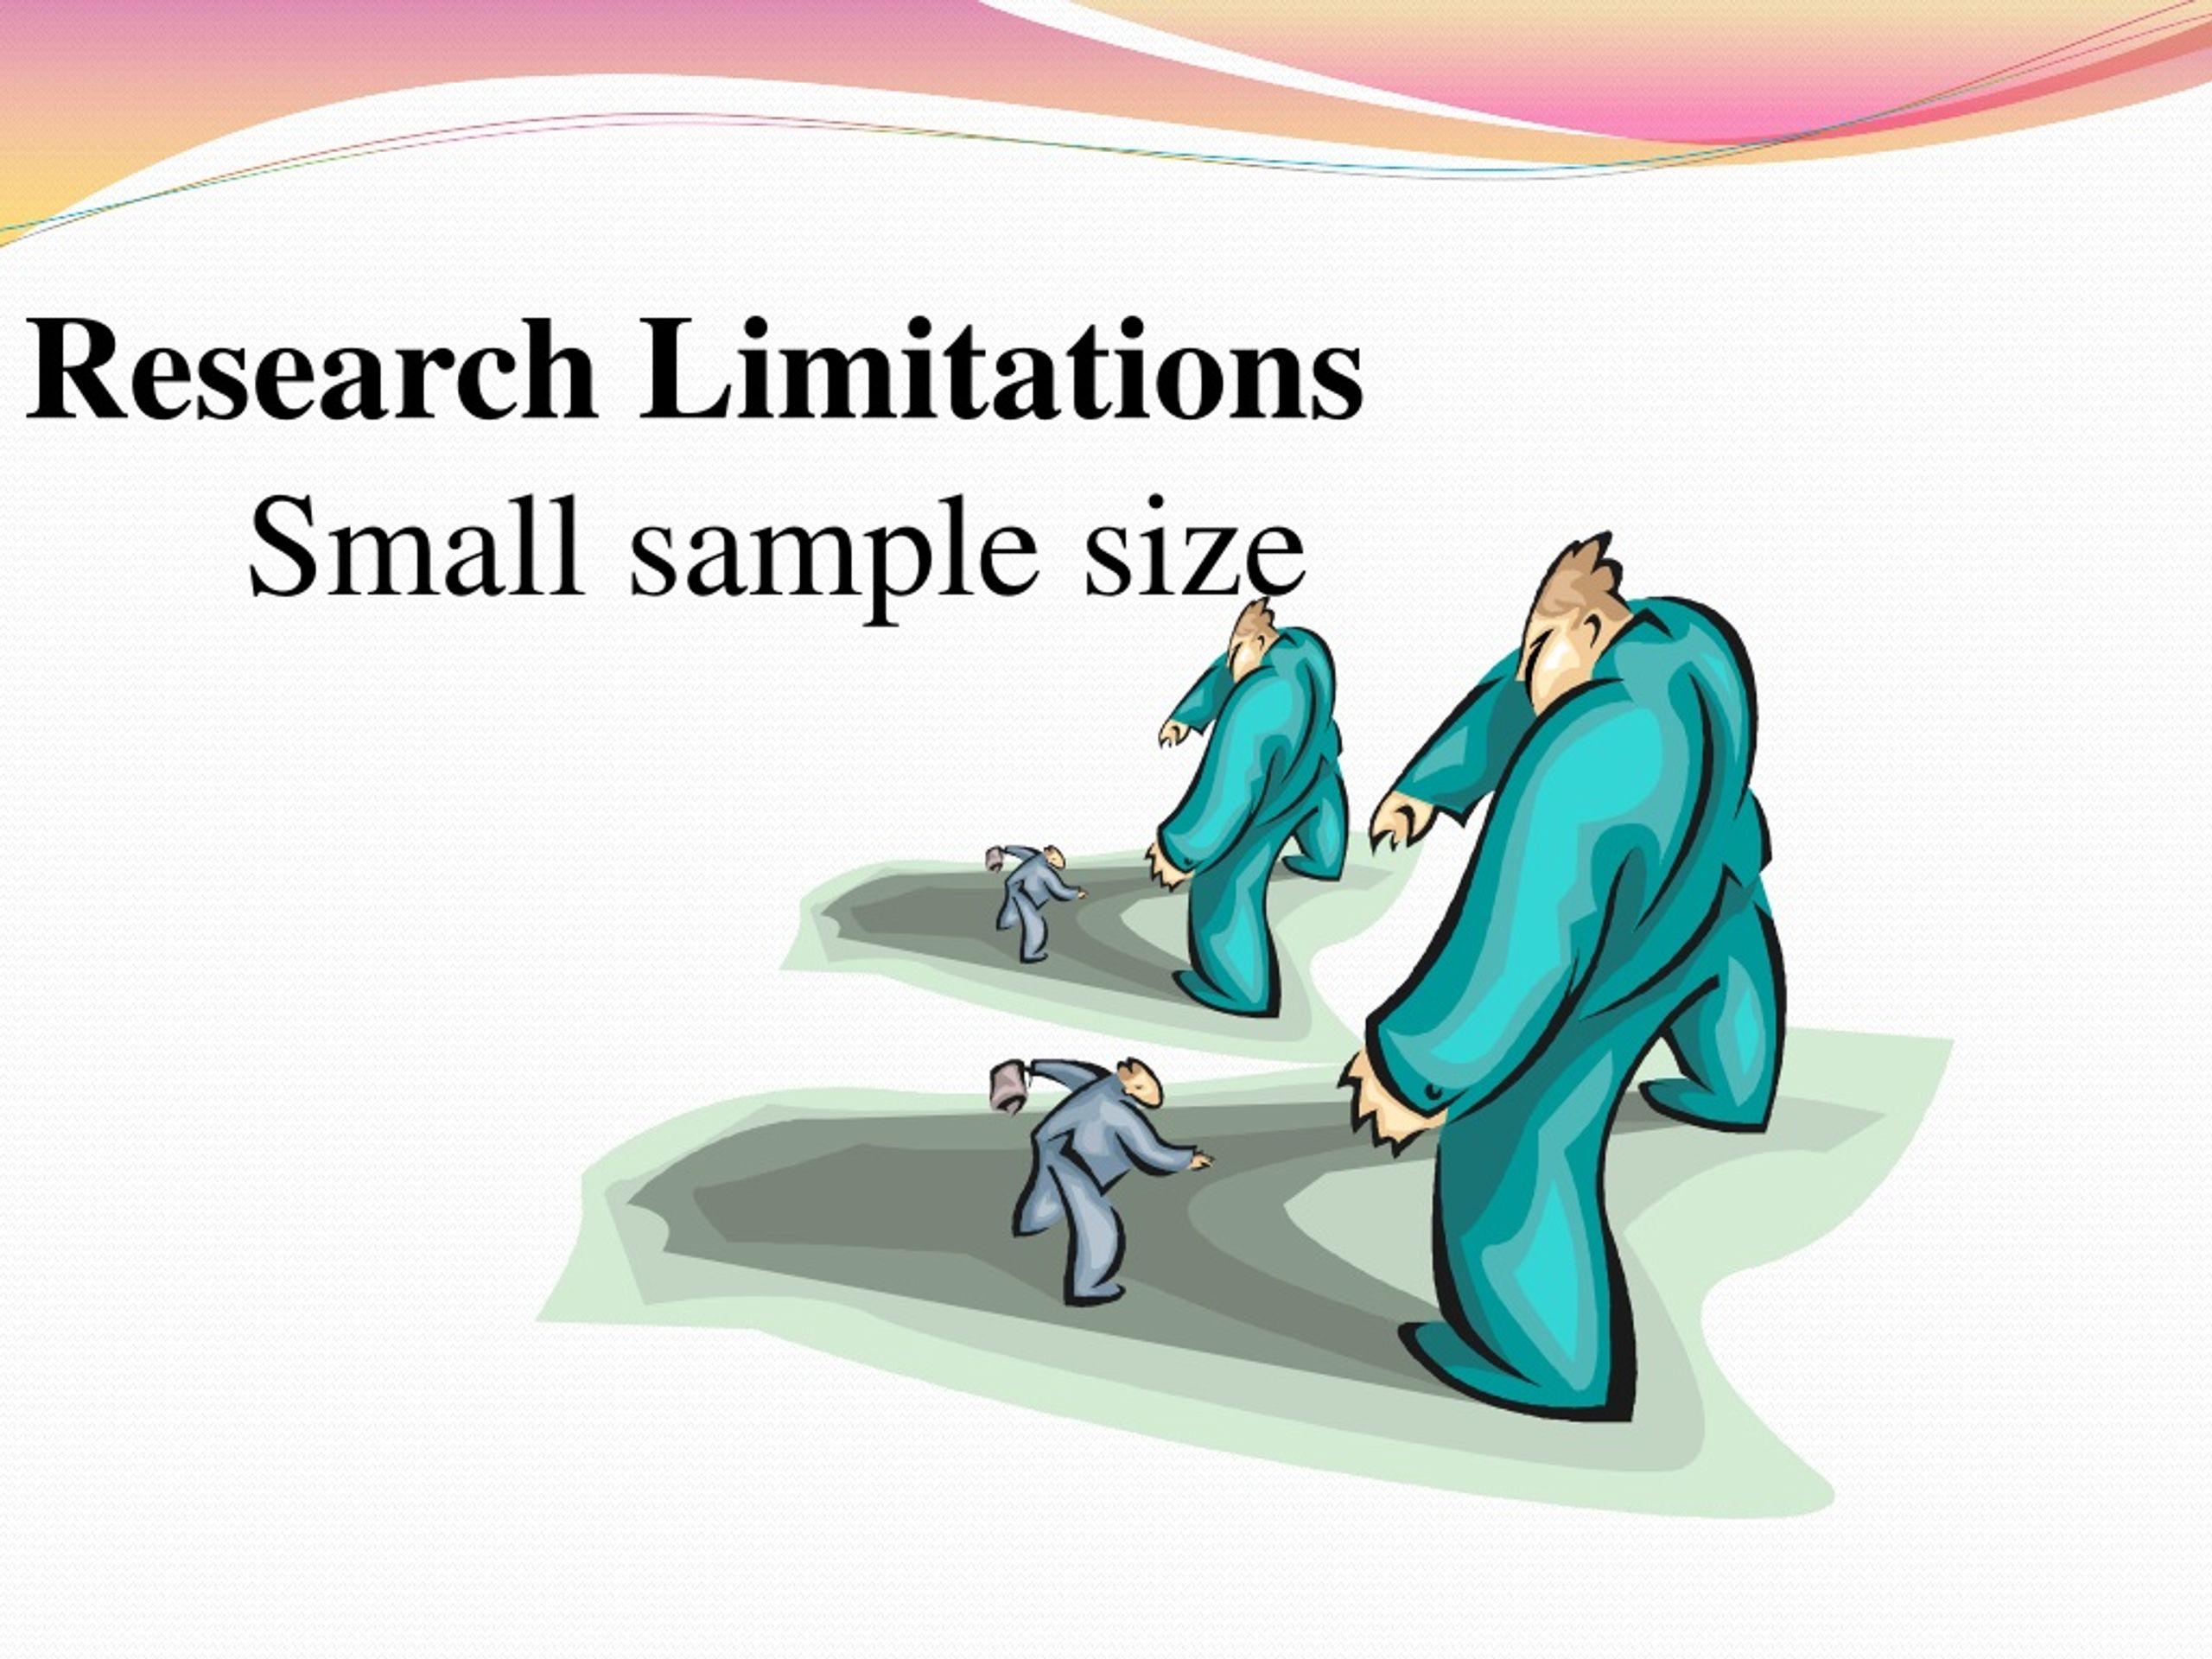 small sample size research limitations